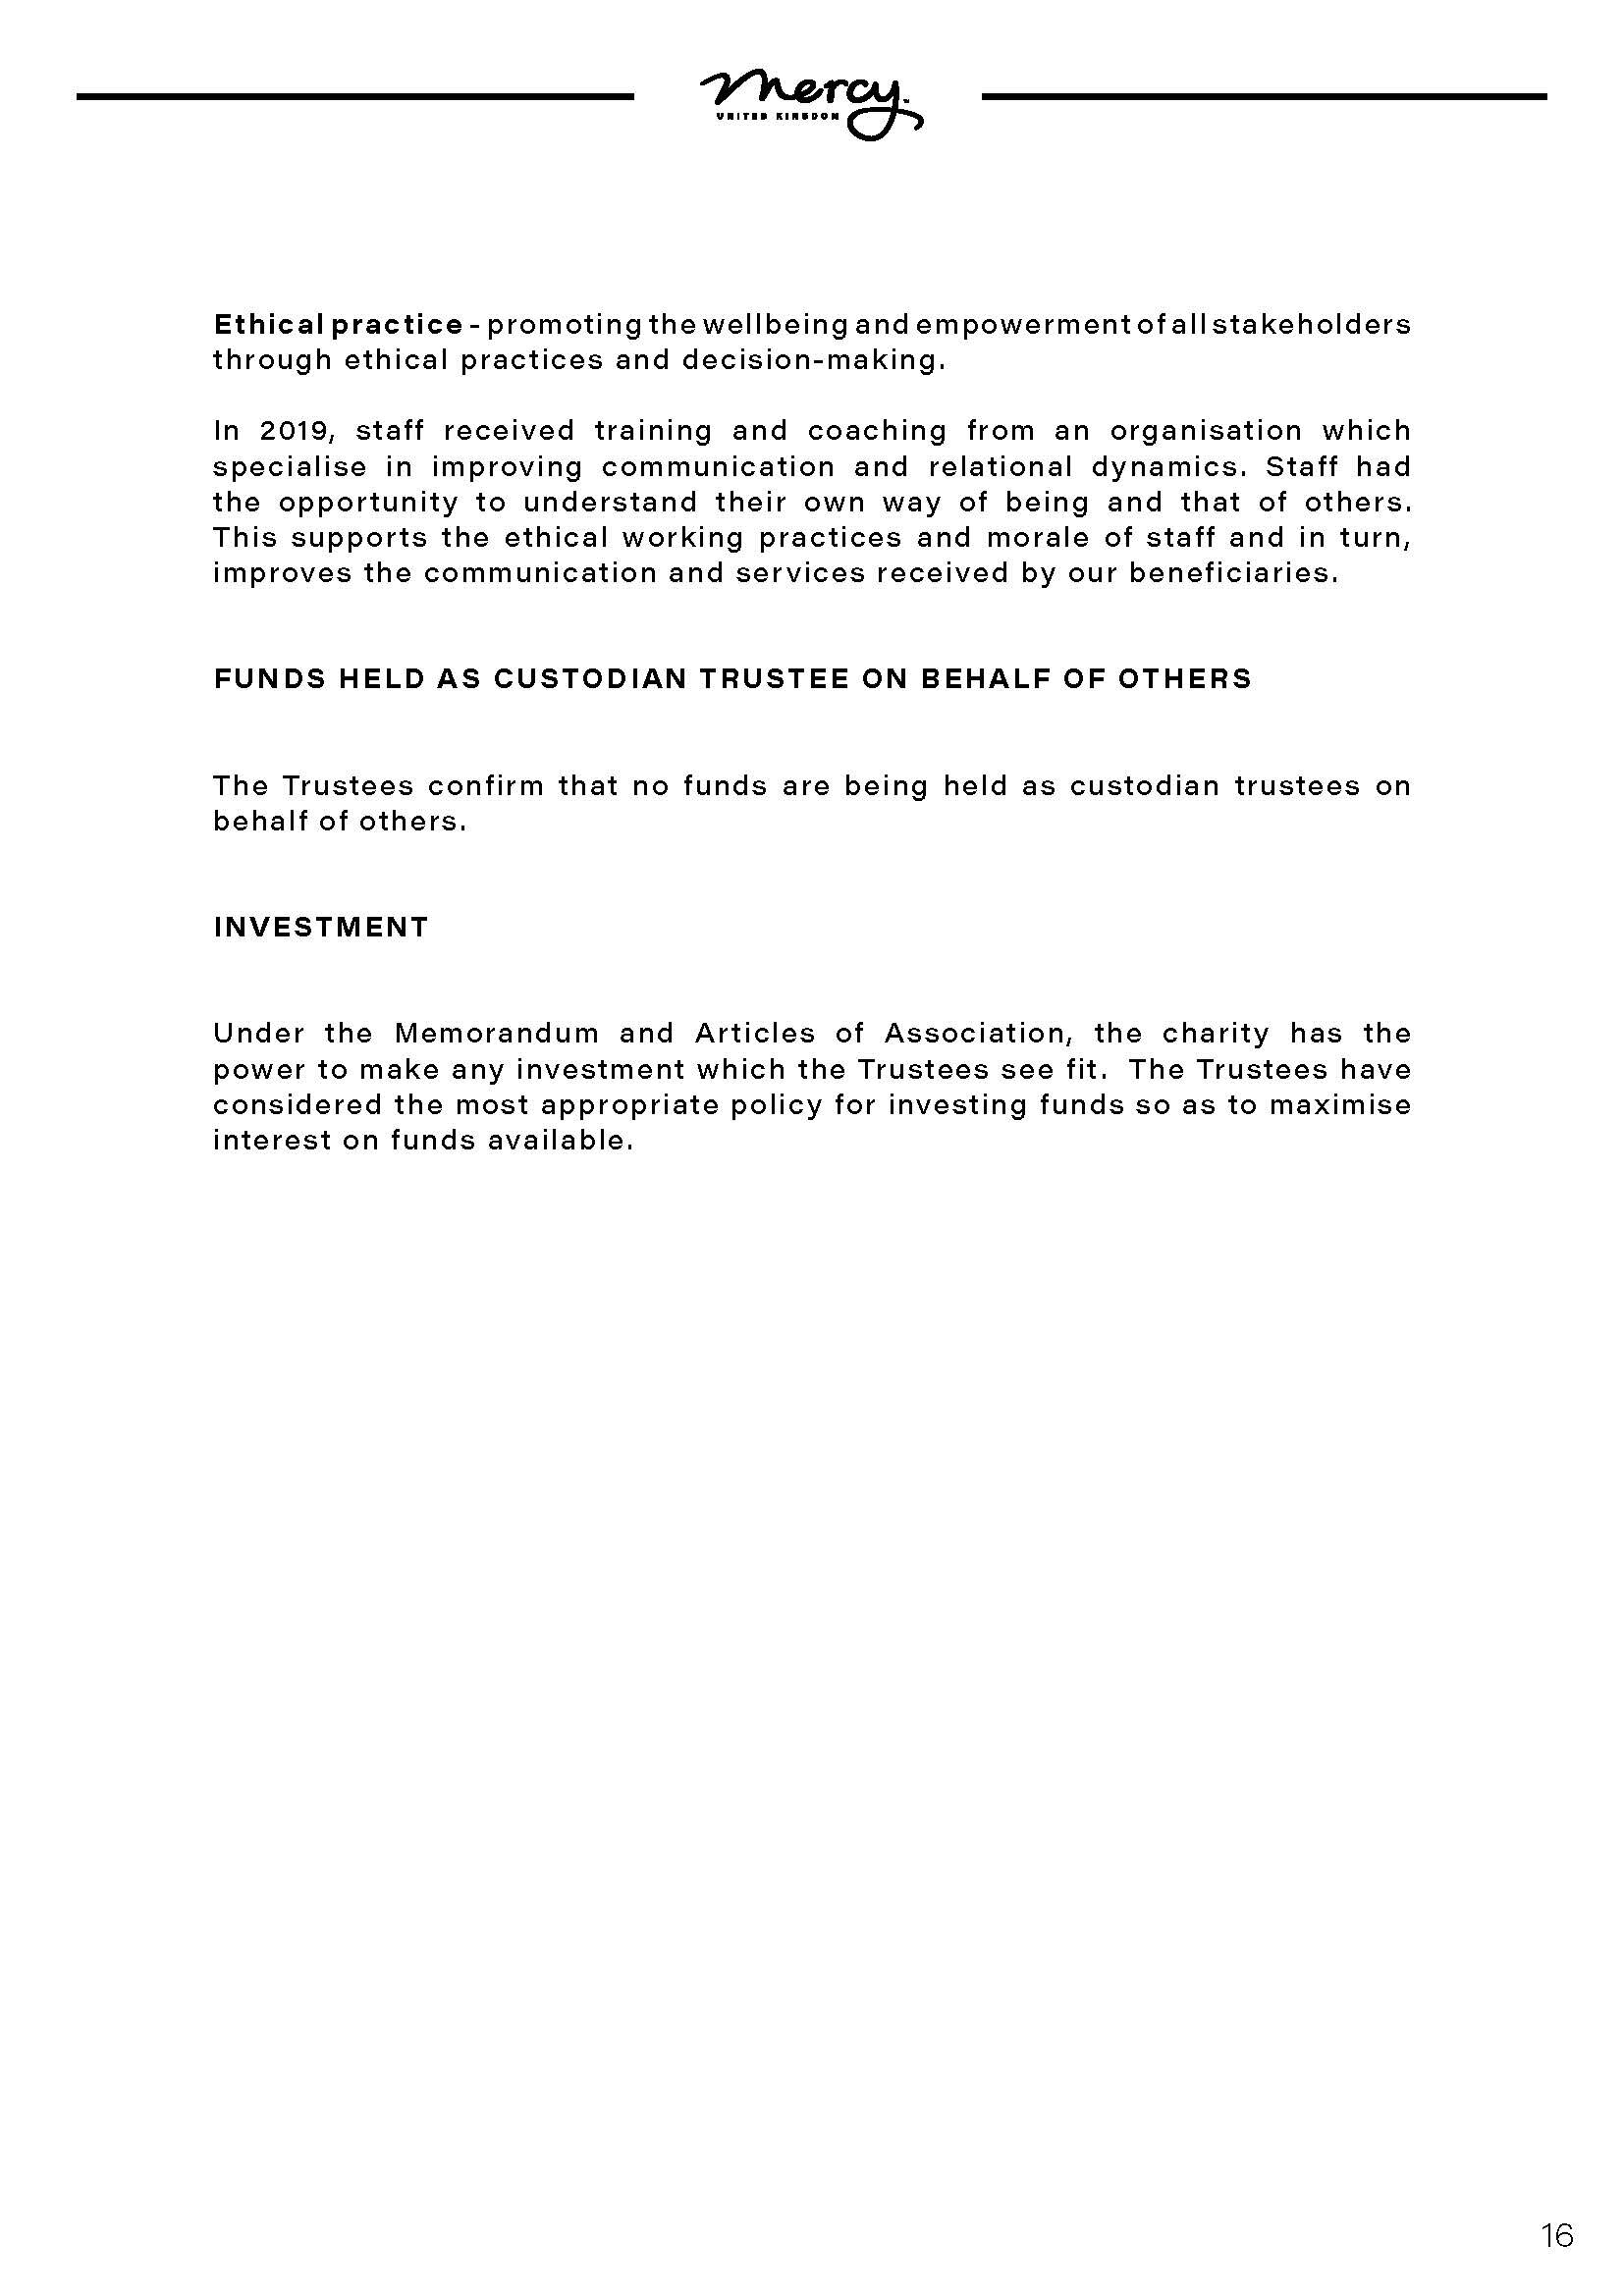 Trustee Report_Amends Page 1_Page_16.jpg